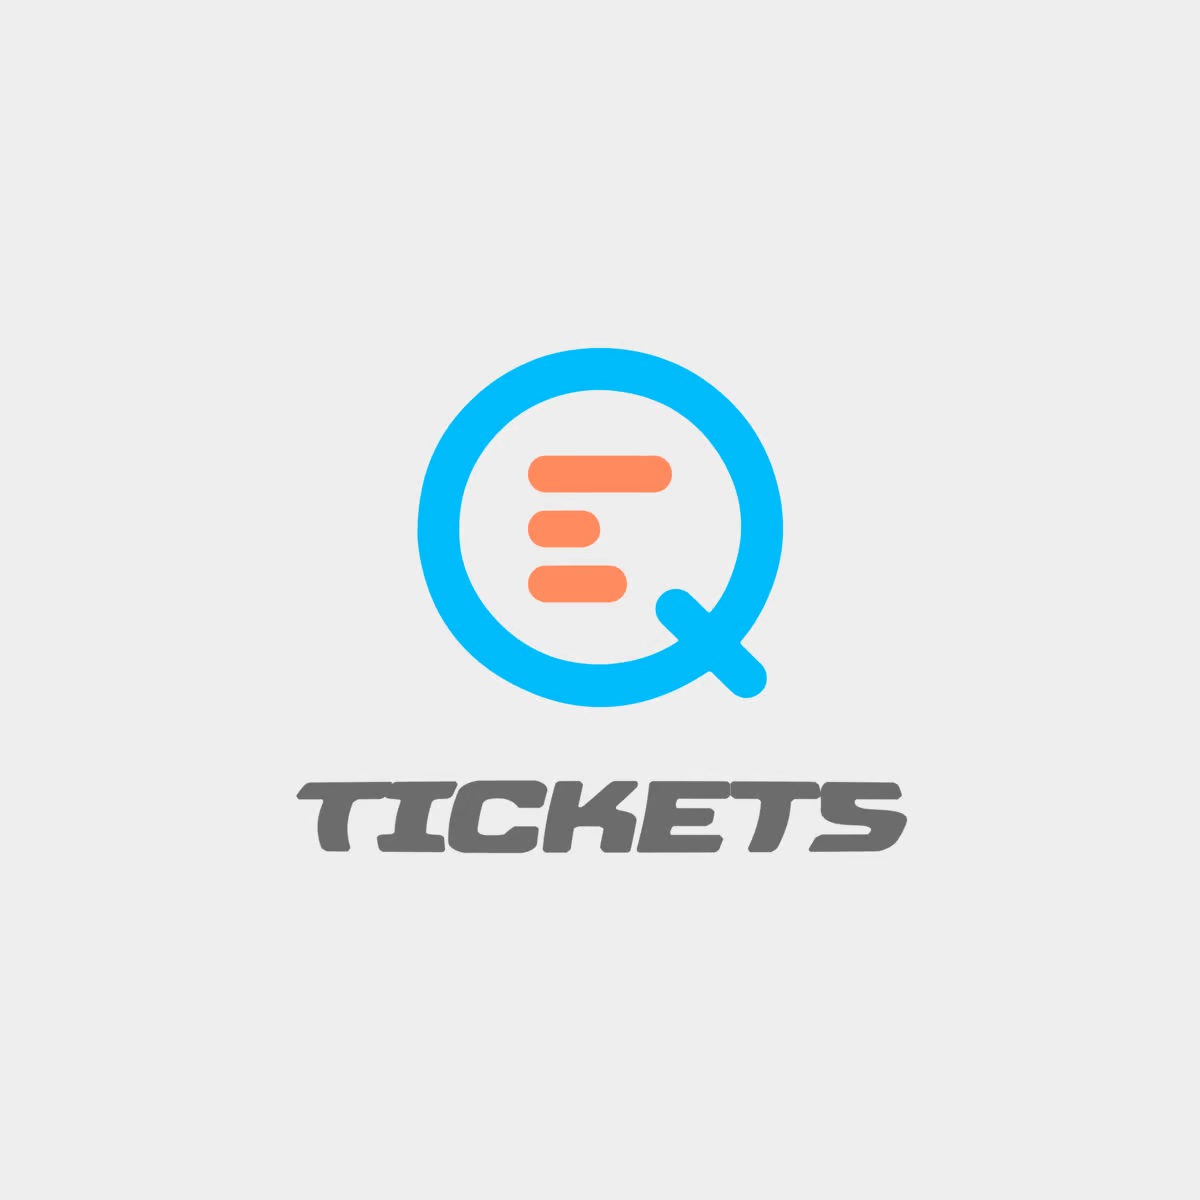 EQ Tickets: The Social Ticket-Buying Experience